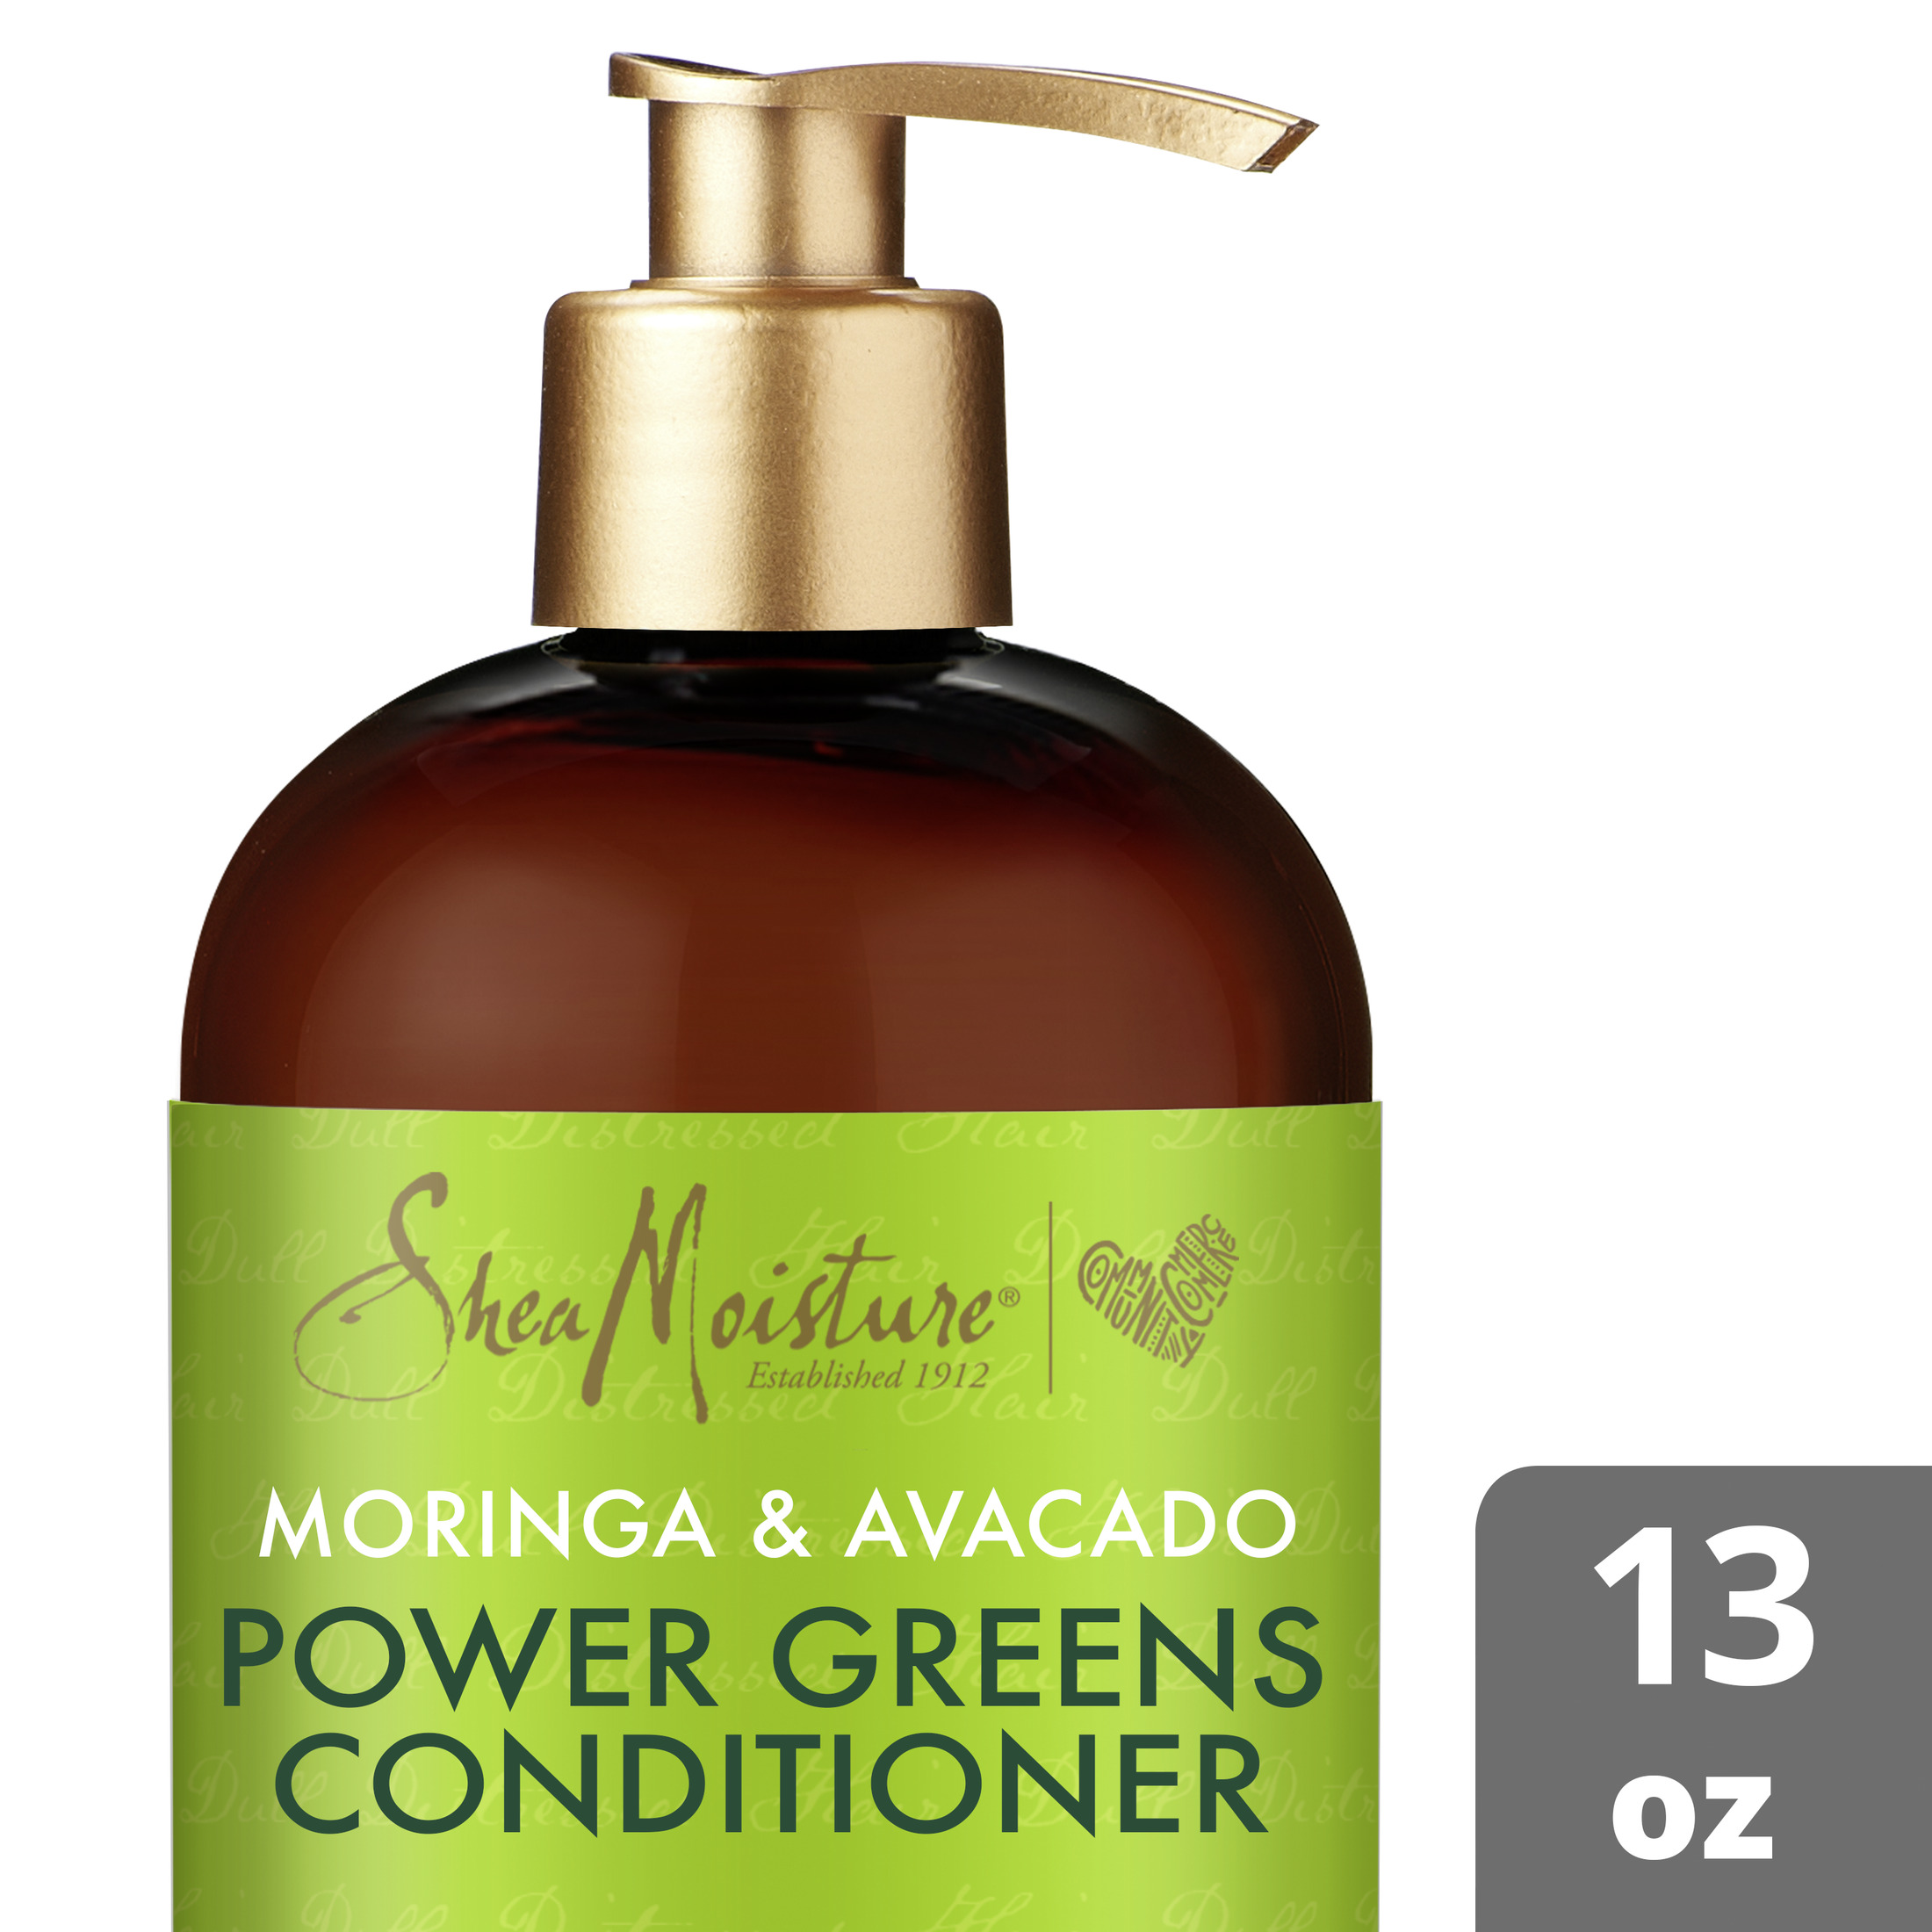 SheaMoisture Power Greens Deep Conditioner for Curly Hair with Kale, Moringa and Avocado, 13 fl oz - image 2 of 12